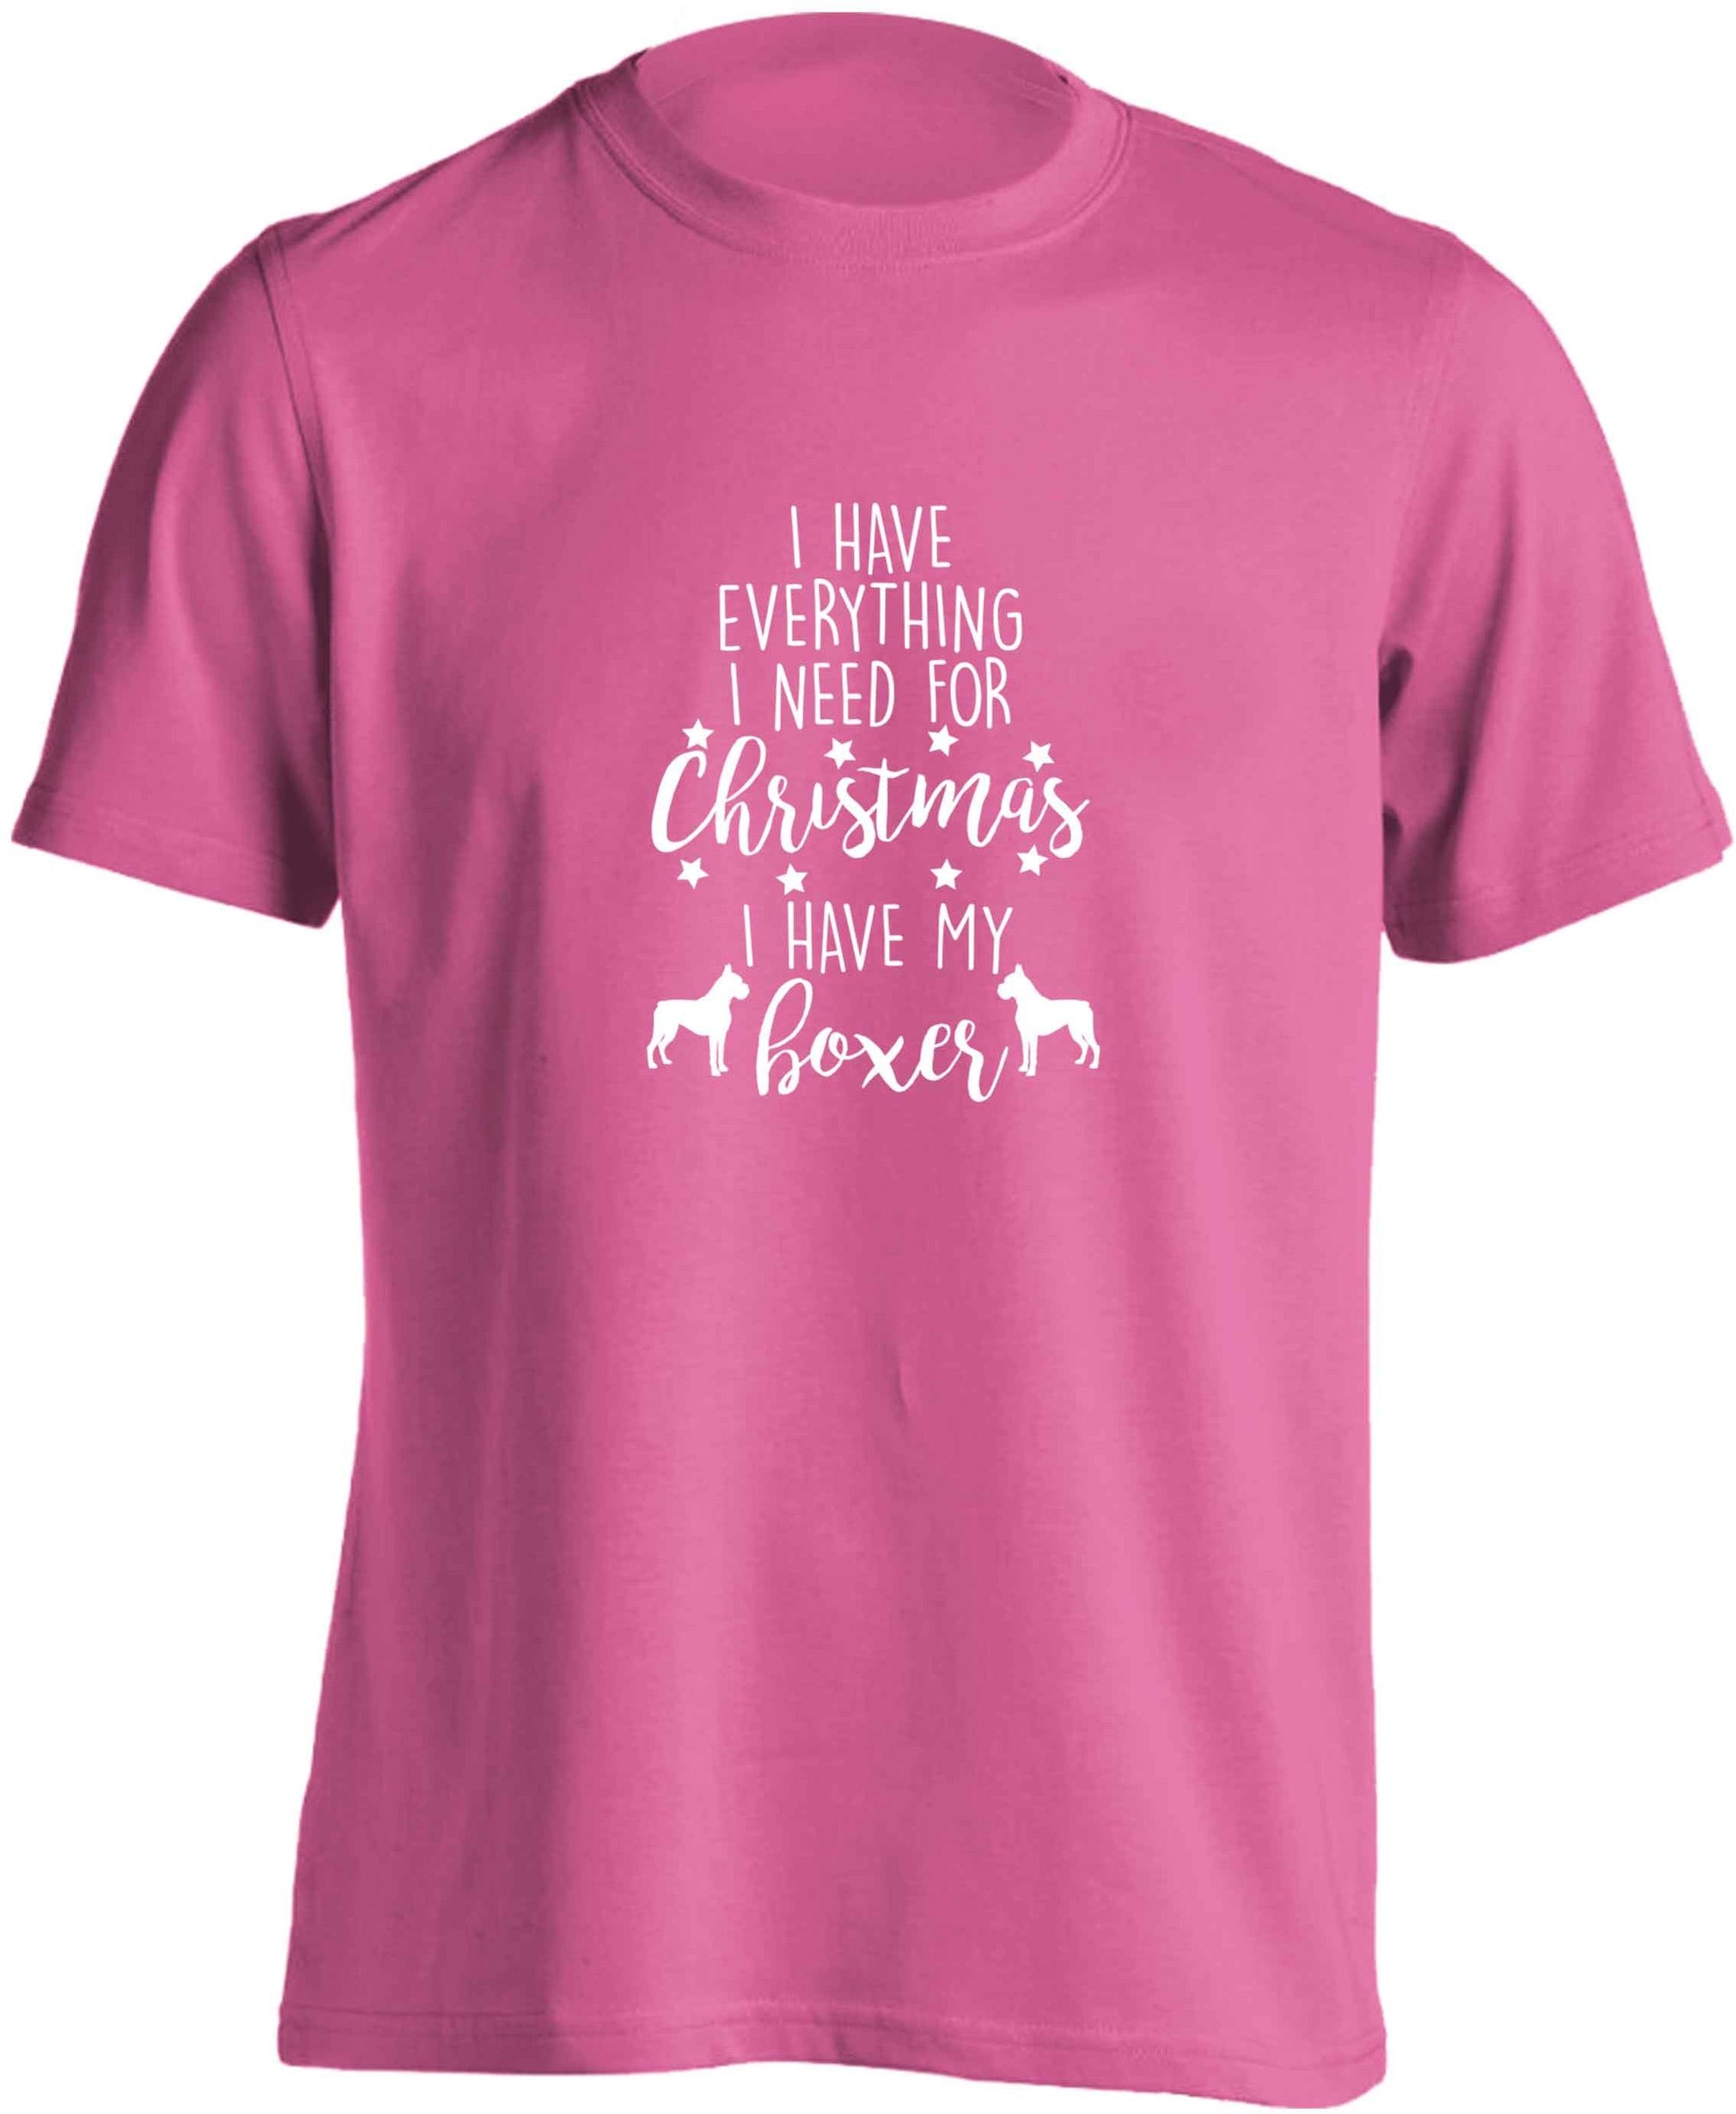 I have everything I need for Christmas I have my boxer adults unisex pink Tshirt 2XL